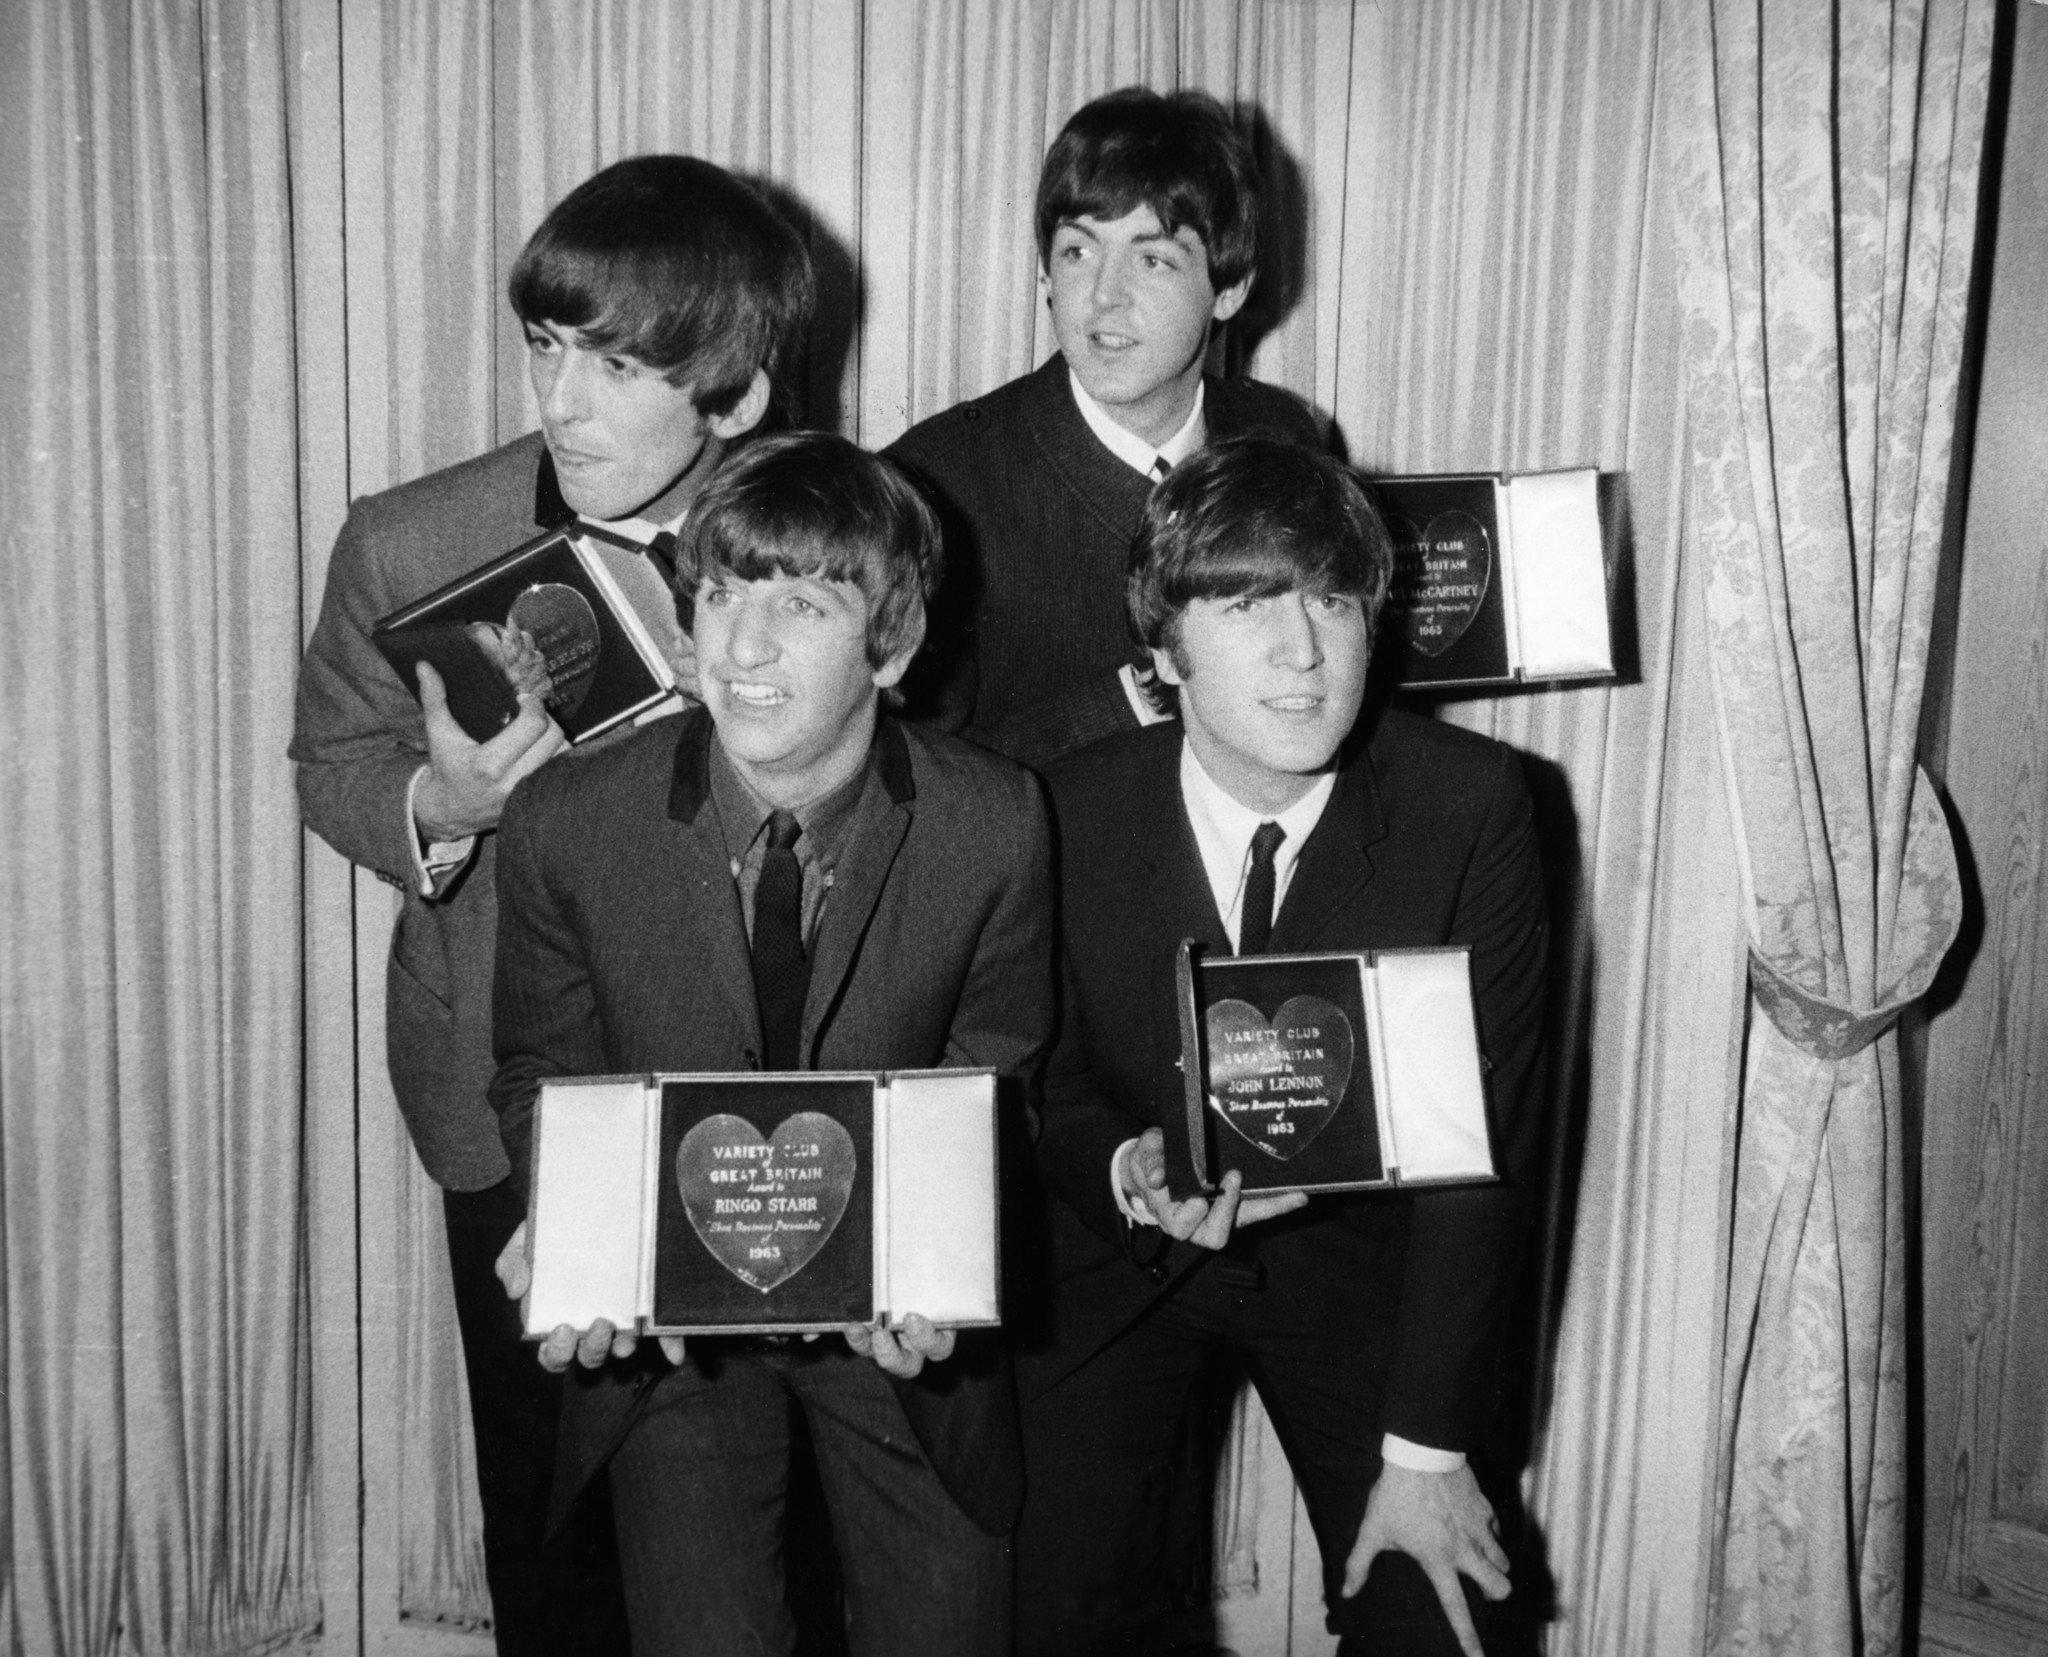 (l-r) George Harrison, Paul McCartney, front row, Ringo Starr and John Lennon of The Beatles receiving awards from the Variety Club of Great Britain in 1963.